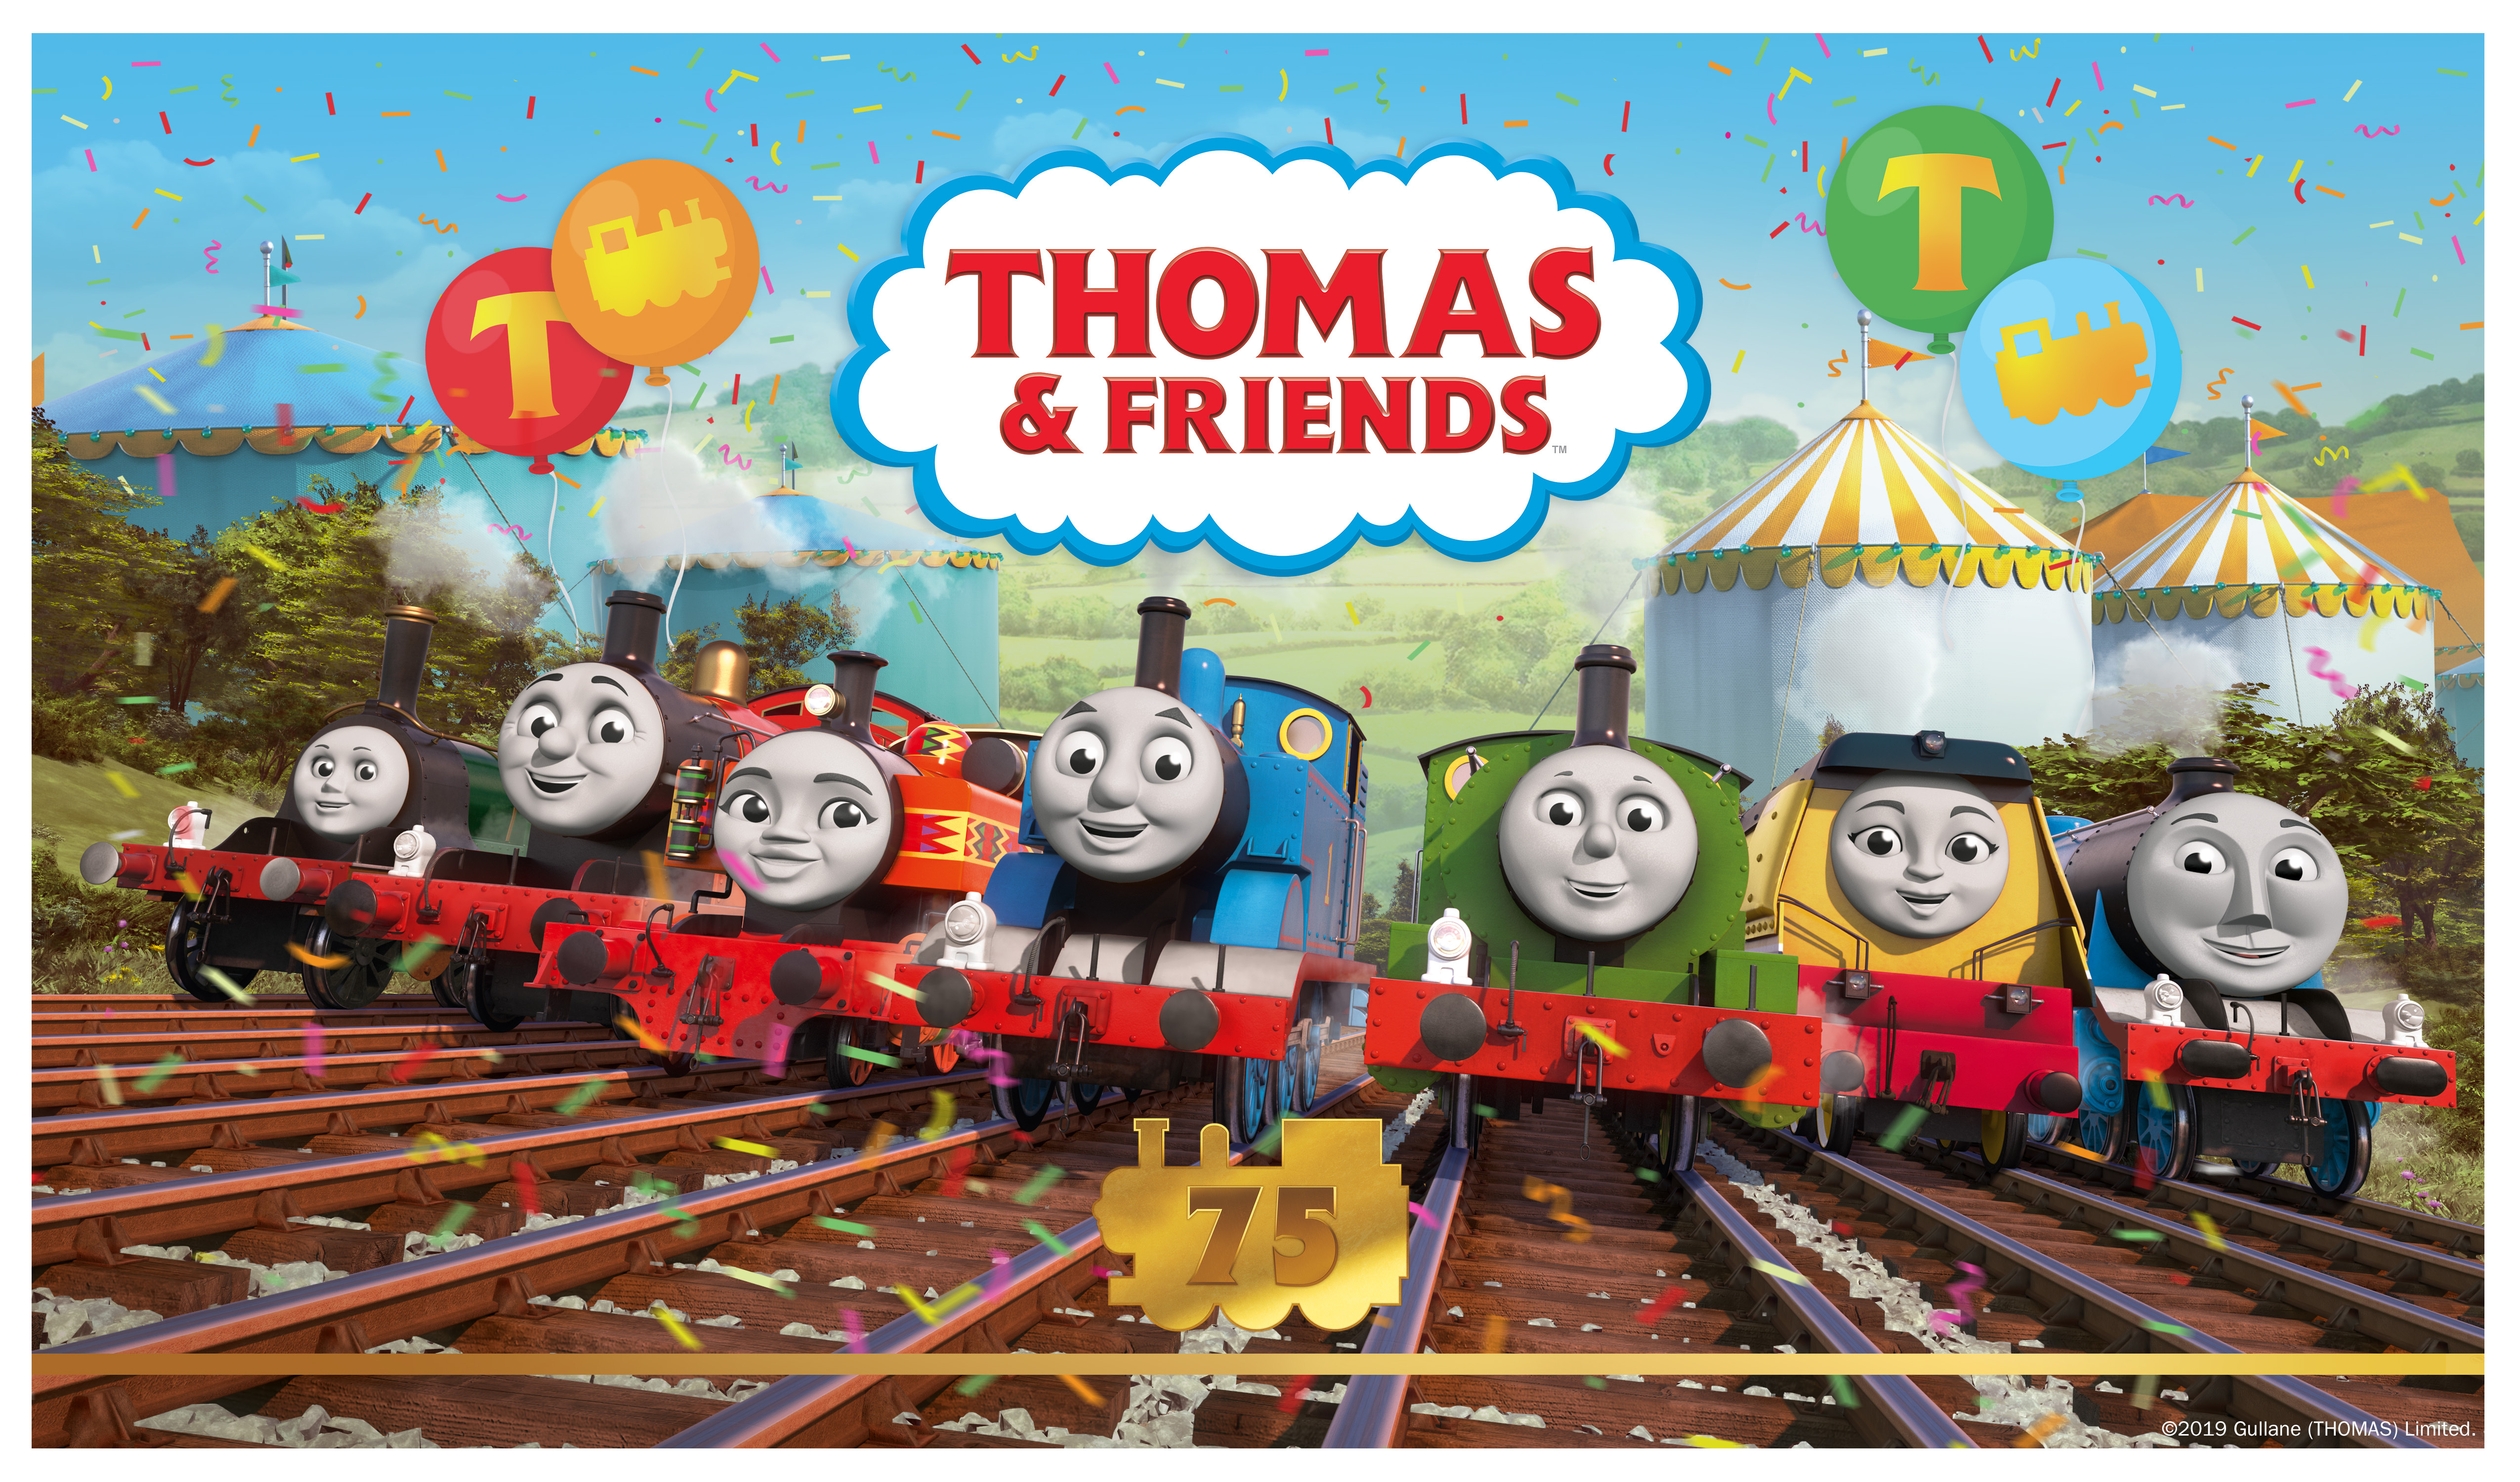 thomas the tank engine and his friends